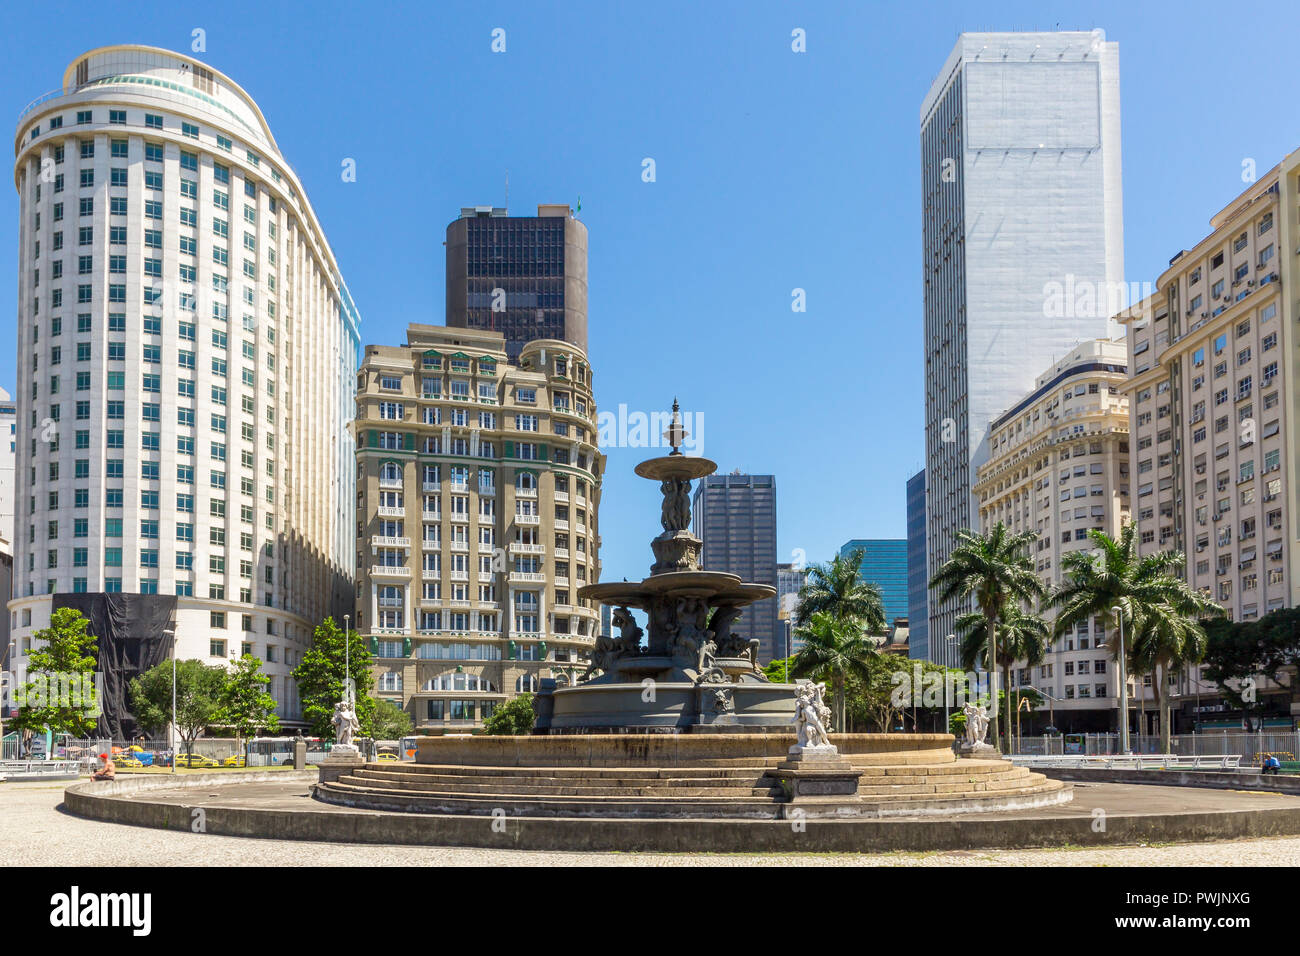 View from Mahatma Gandhi Square to the buildings at Cinelândia in the city centre of Rio de Janeiro, Brazil, South America Stock Photo